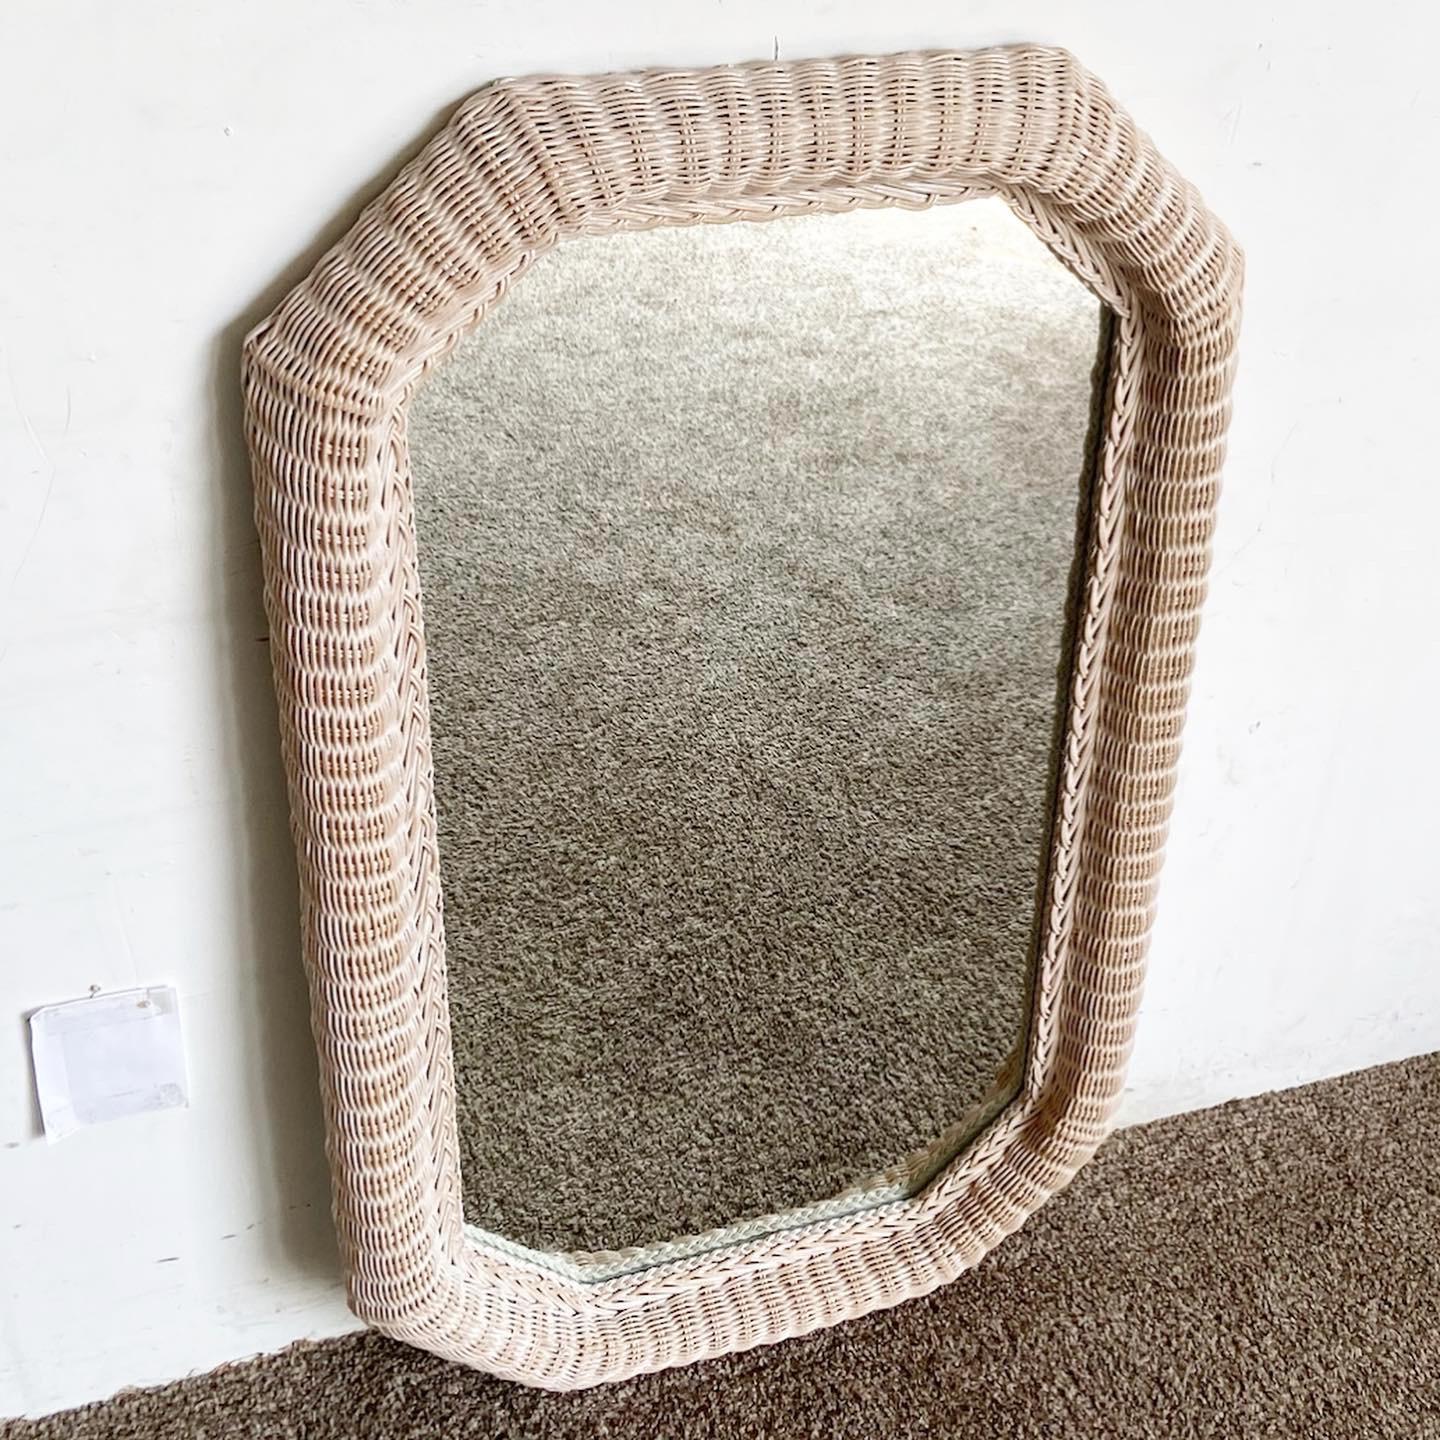 Enhance your home decor with the Boho Chic Octagonal Wicker Wall Mirror by Lexington. This statement piece is intricately crafted from wicker and offers a textured, boho chic aesthetic.
Vintage pieces may have age-related wear. Review photos